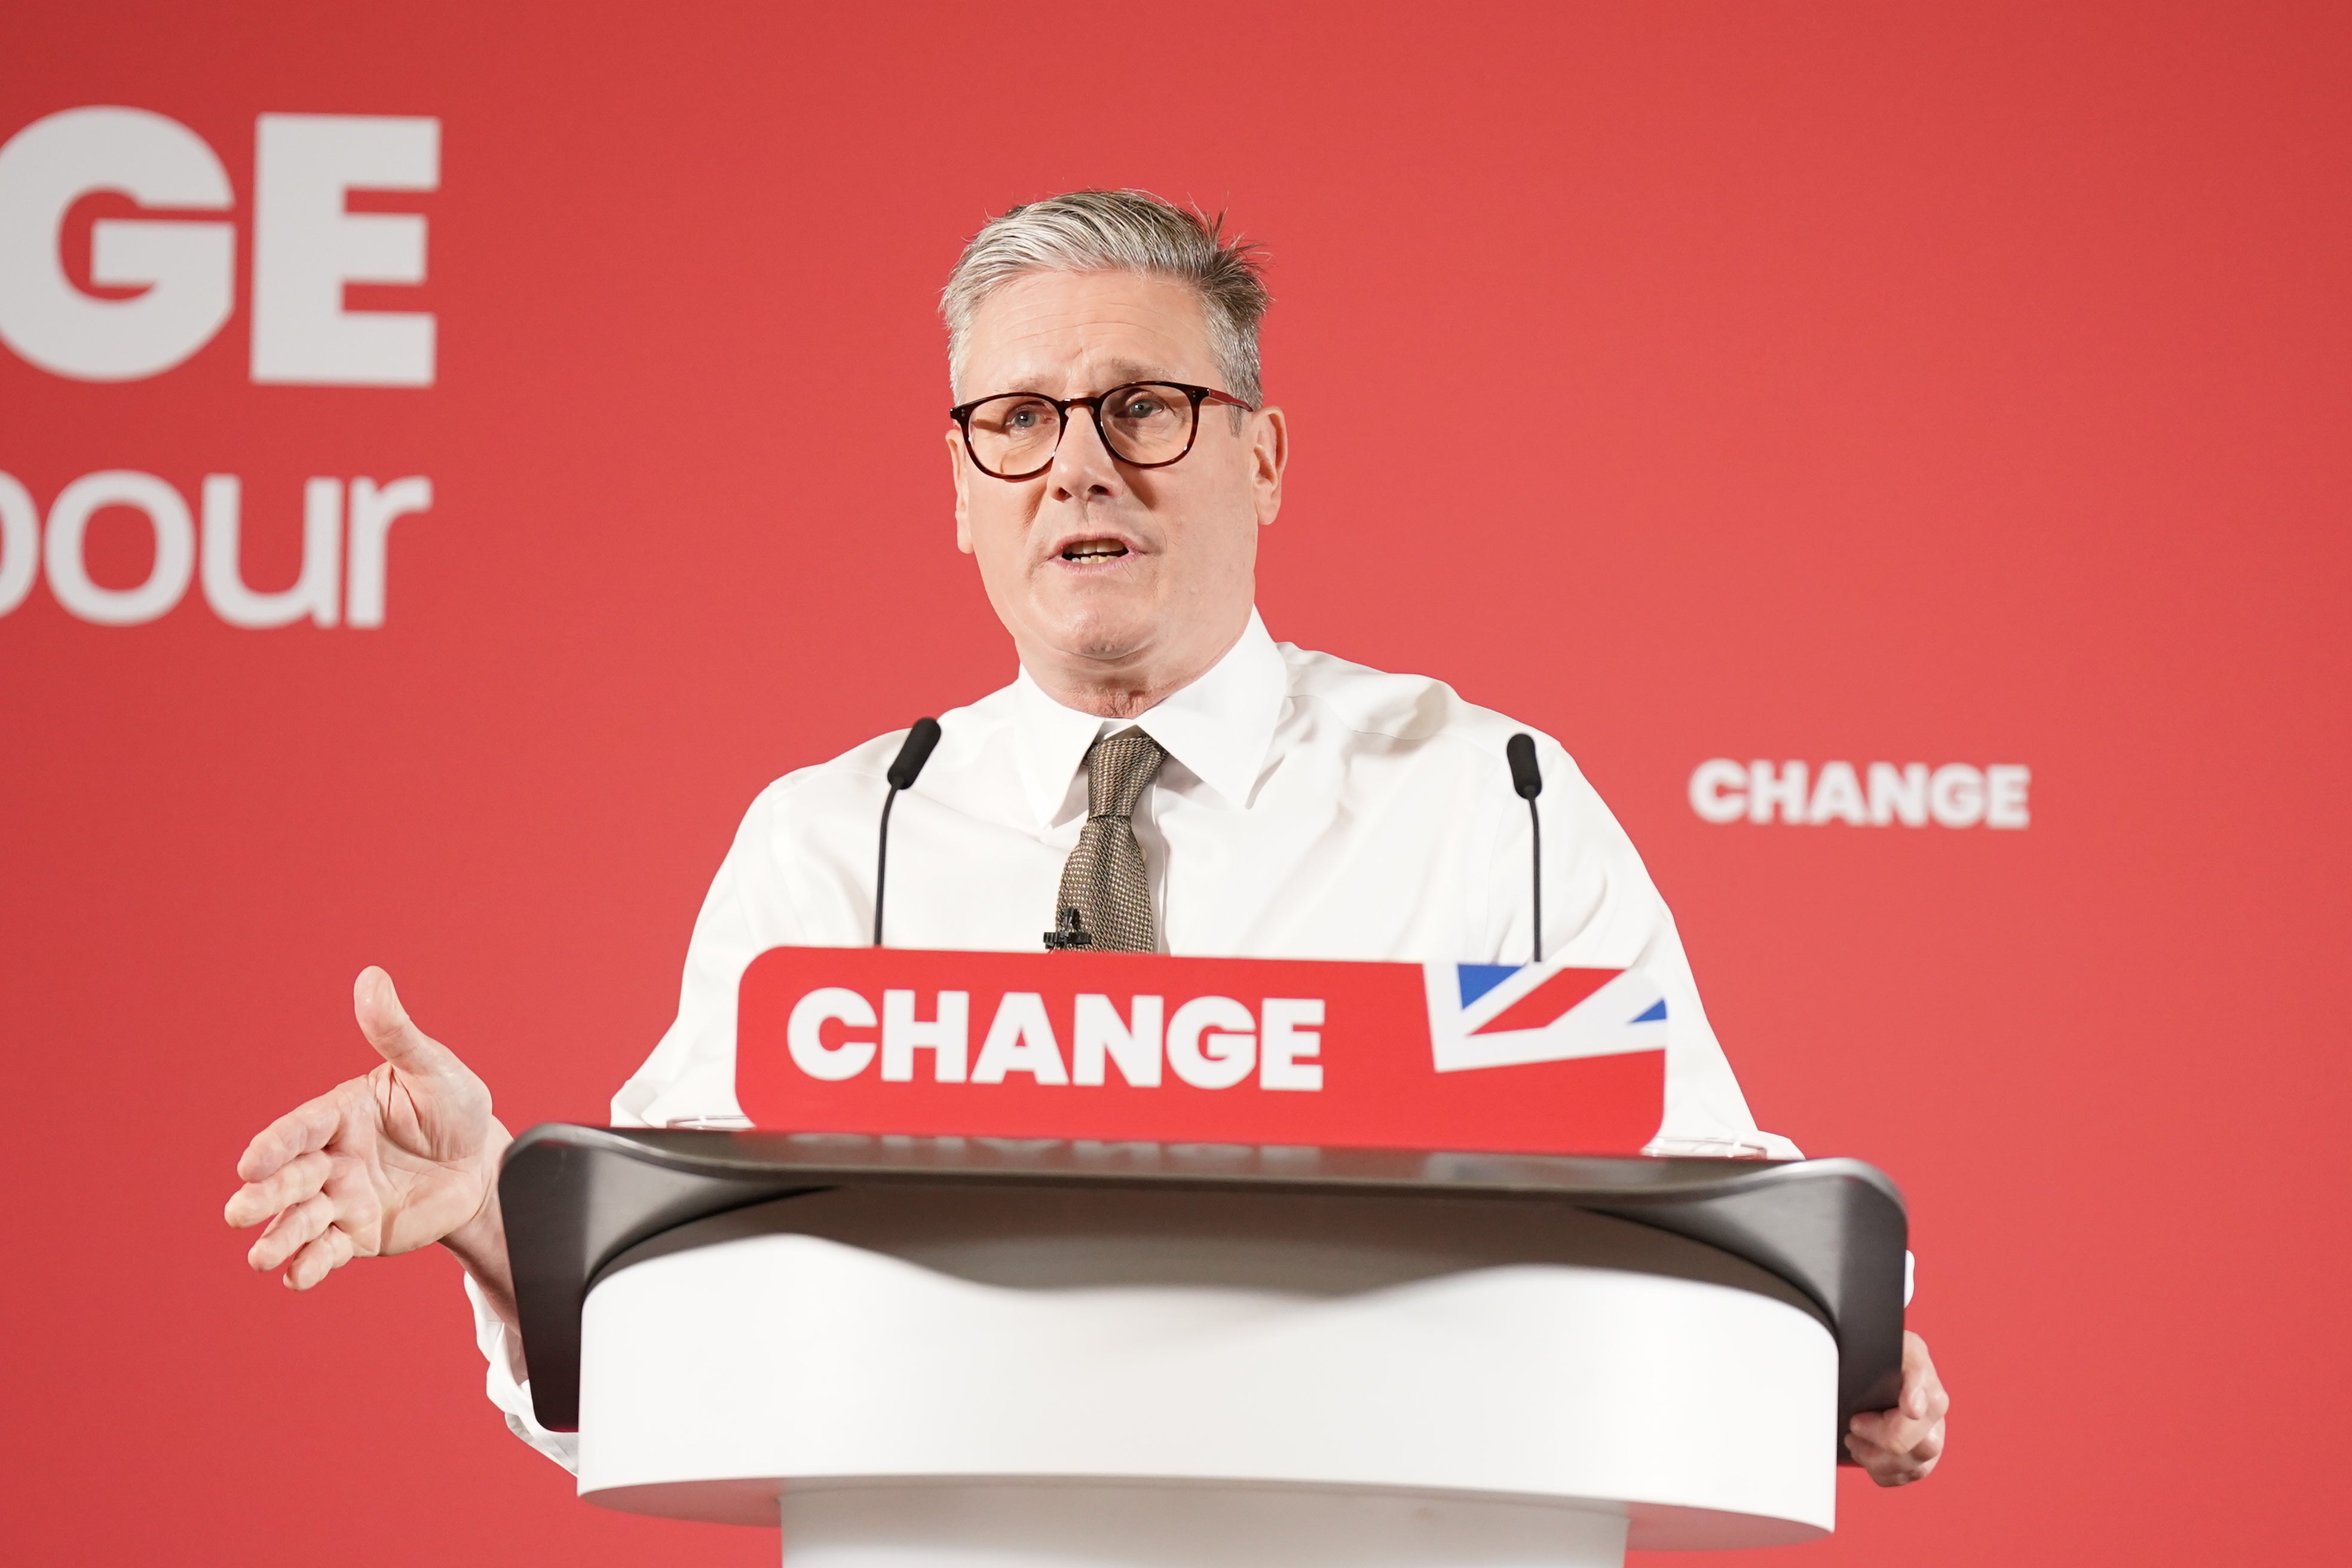 Labor leader Sir Keir Starmer delivers his first major speech during his visit to Lancing, West Sussex, during the general election campaign on Monday.